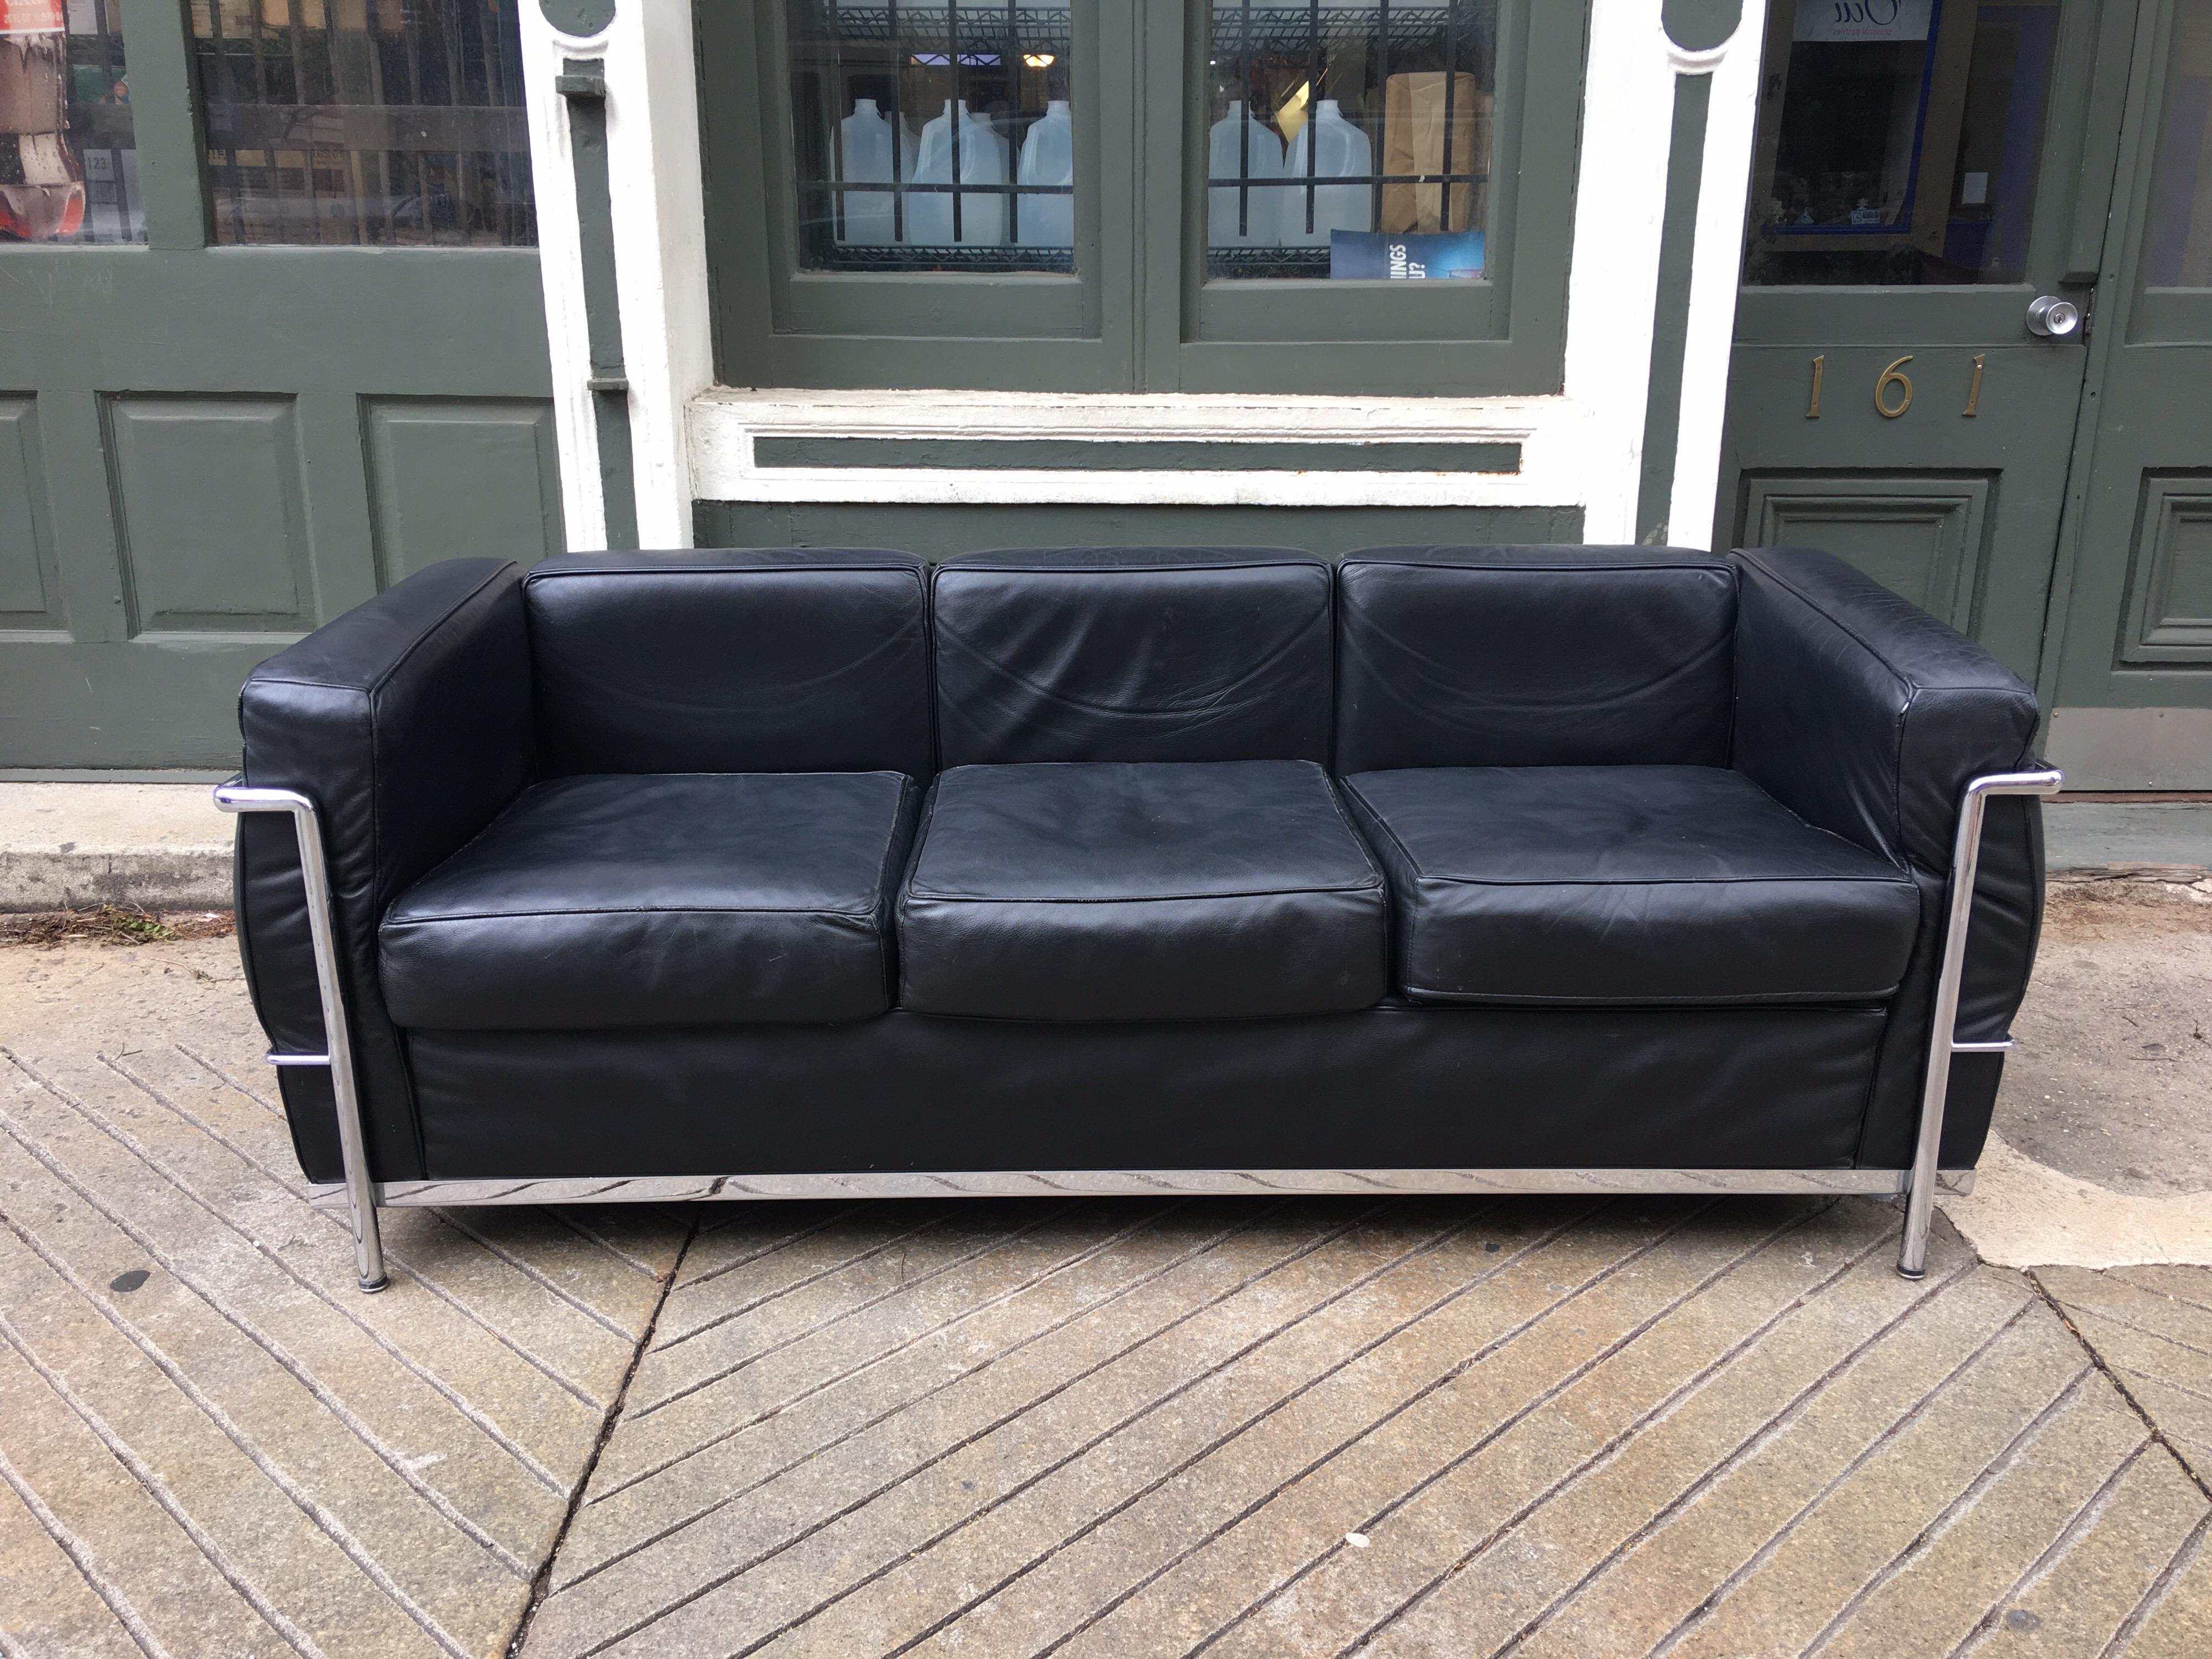 Italian made Le Corbusier LC-2 sofa in black leather. Probably 15-20 years old this Italian made sofa looks pretty good! Chrome is perfect and leather shows some wear mostly on piping, with one spot as seen in photos where the piping is broken.